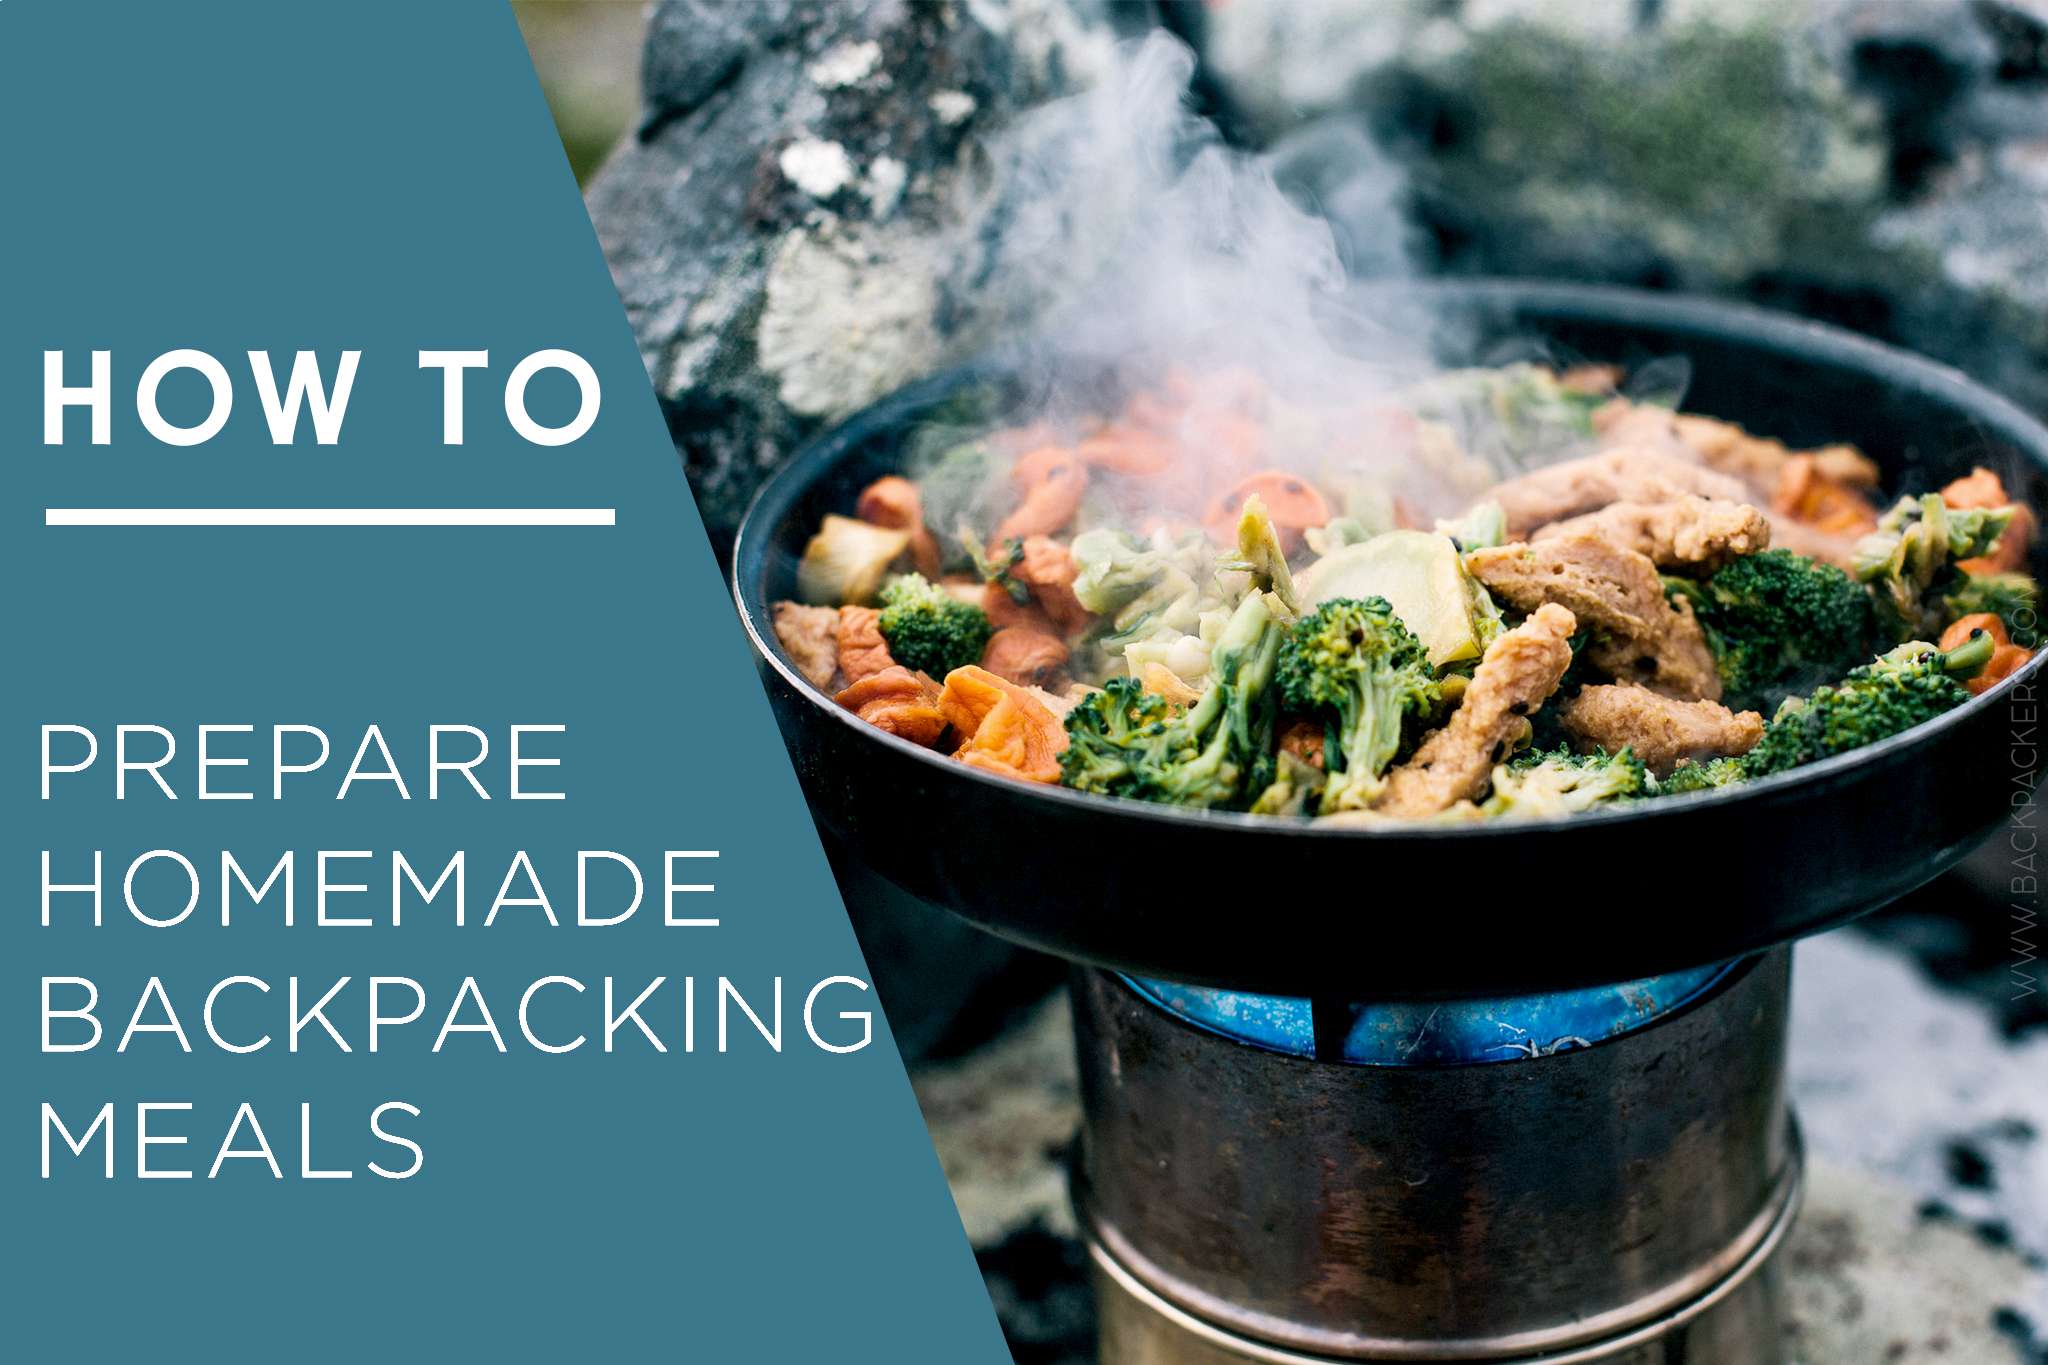 How to Prepare Homemade Backpacking Meals